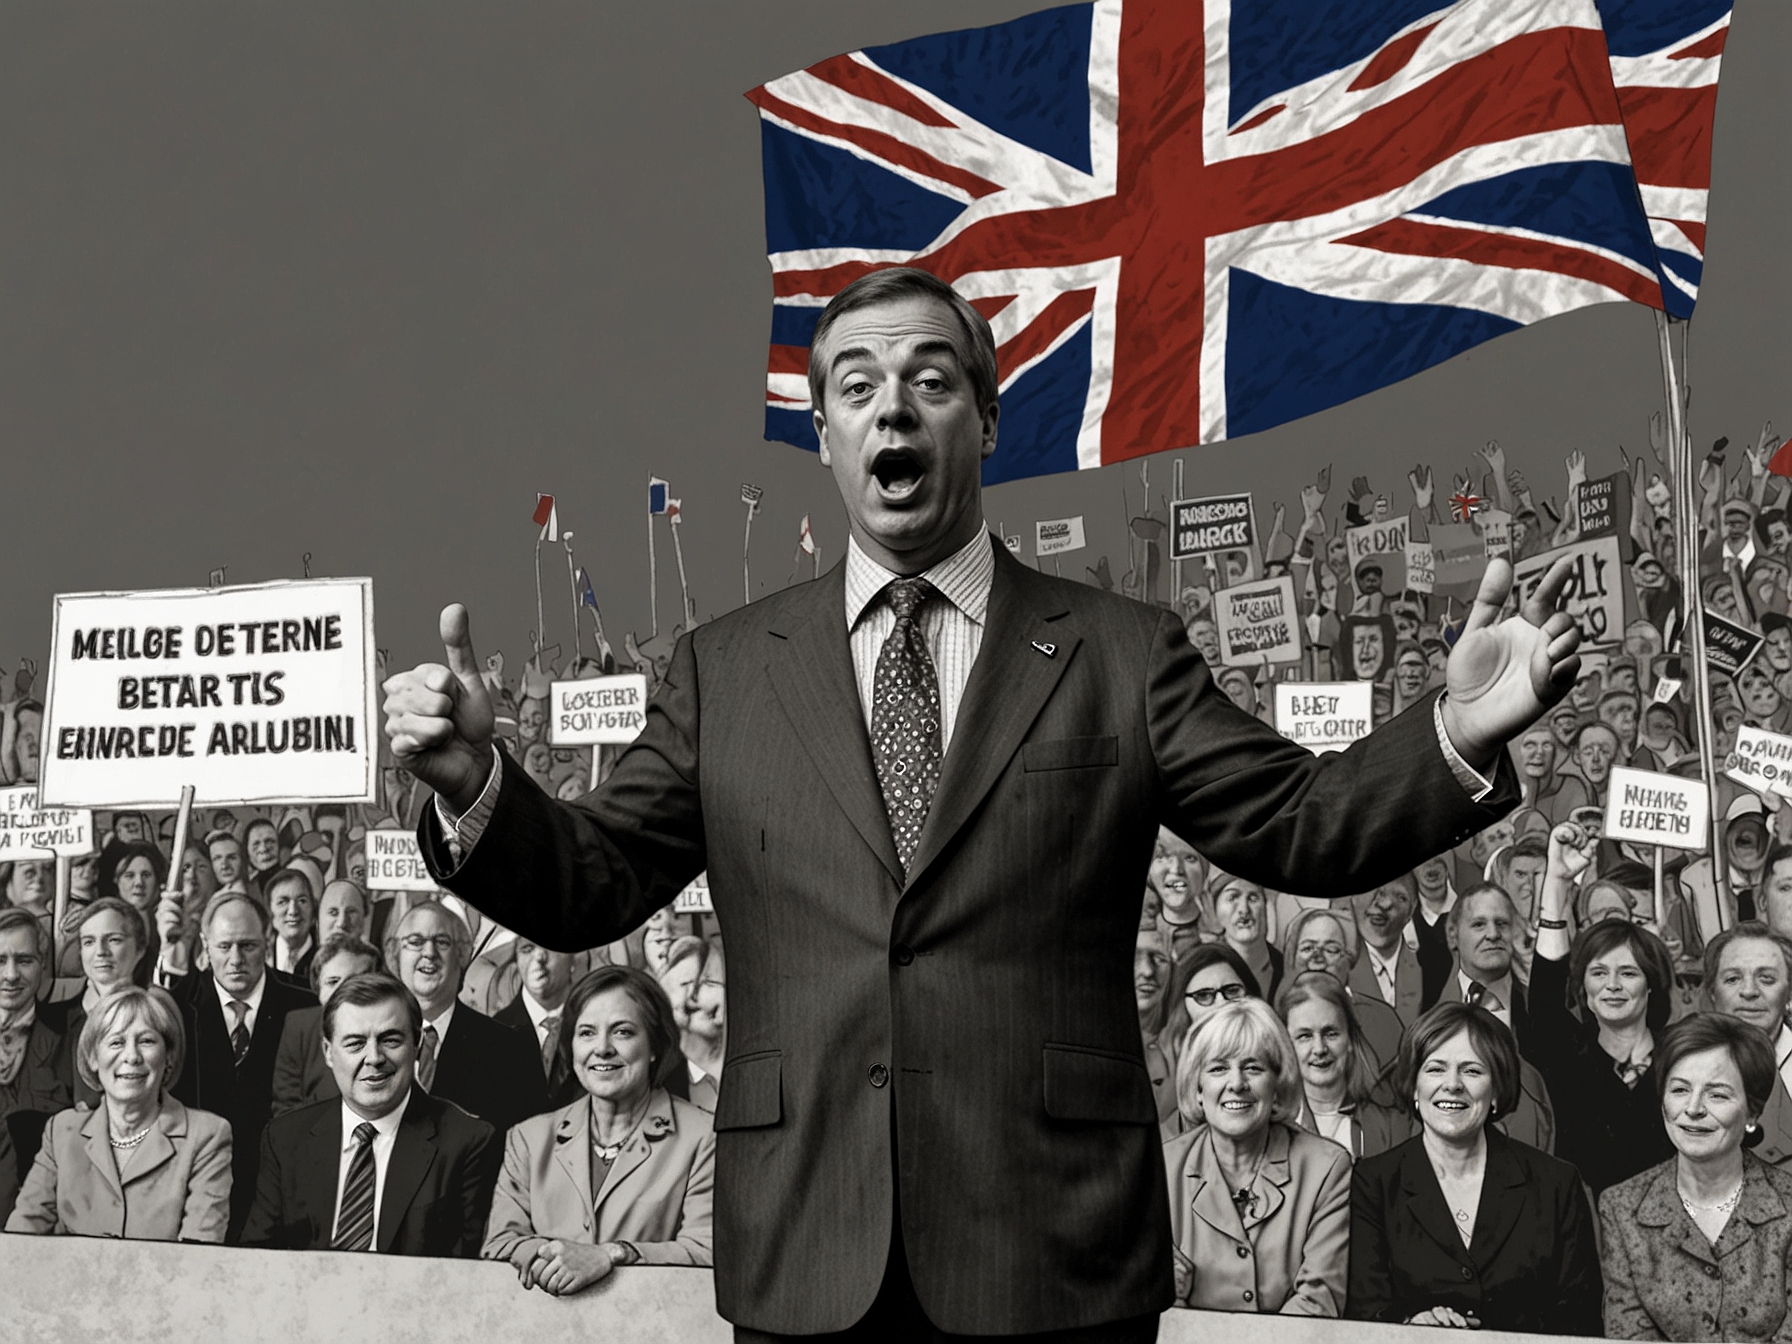 An illustration showing Nigel Farage at a political rally, addressing supporters with Reform UK banners. The image captures his formidable influence on the UK's political landscape.